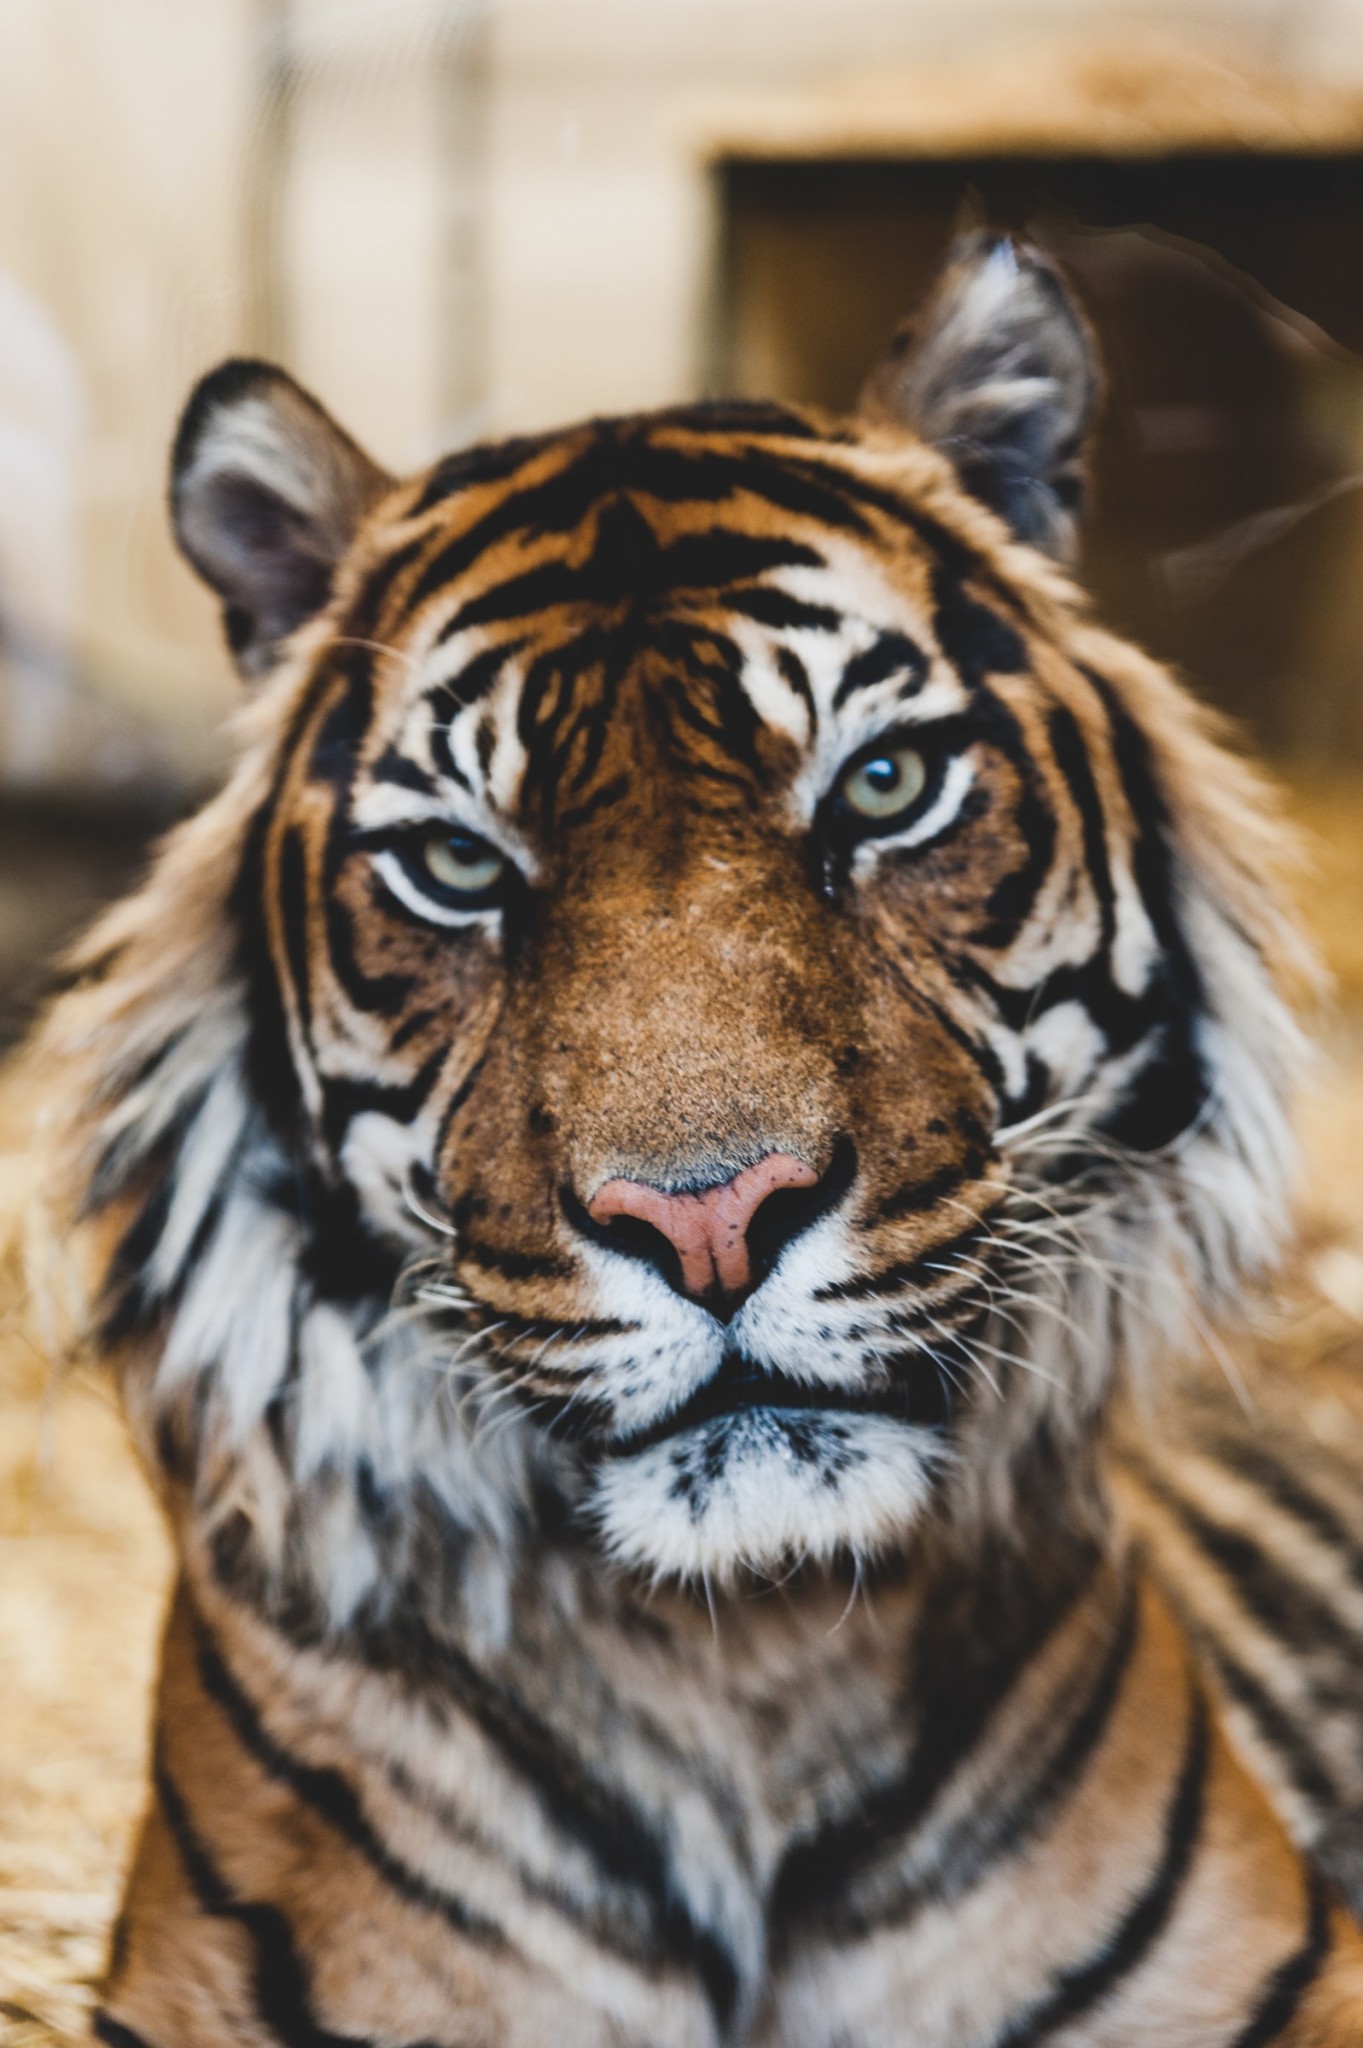 Dartmoor Zoo is home to a pair or Amur Tigers - Dragan and Alisha